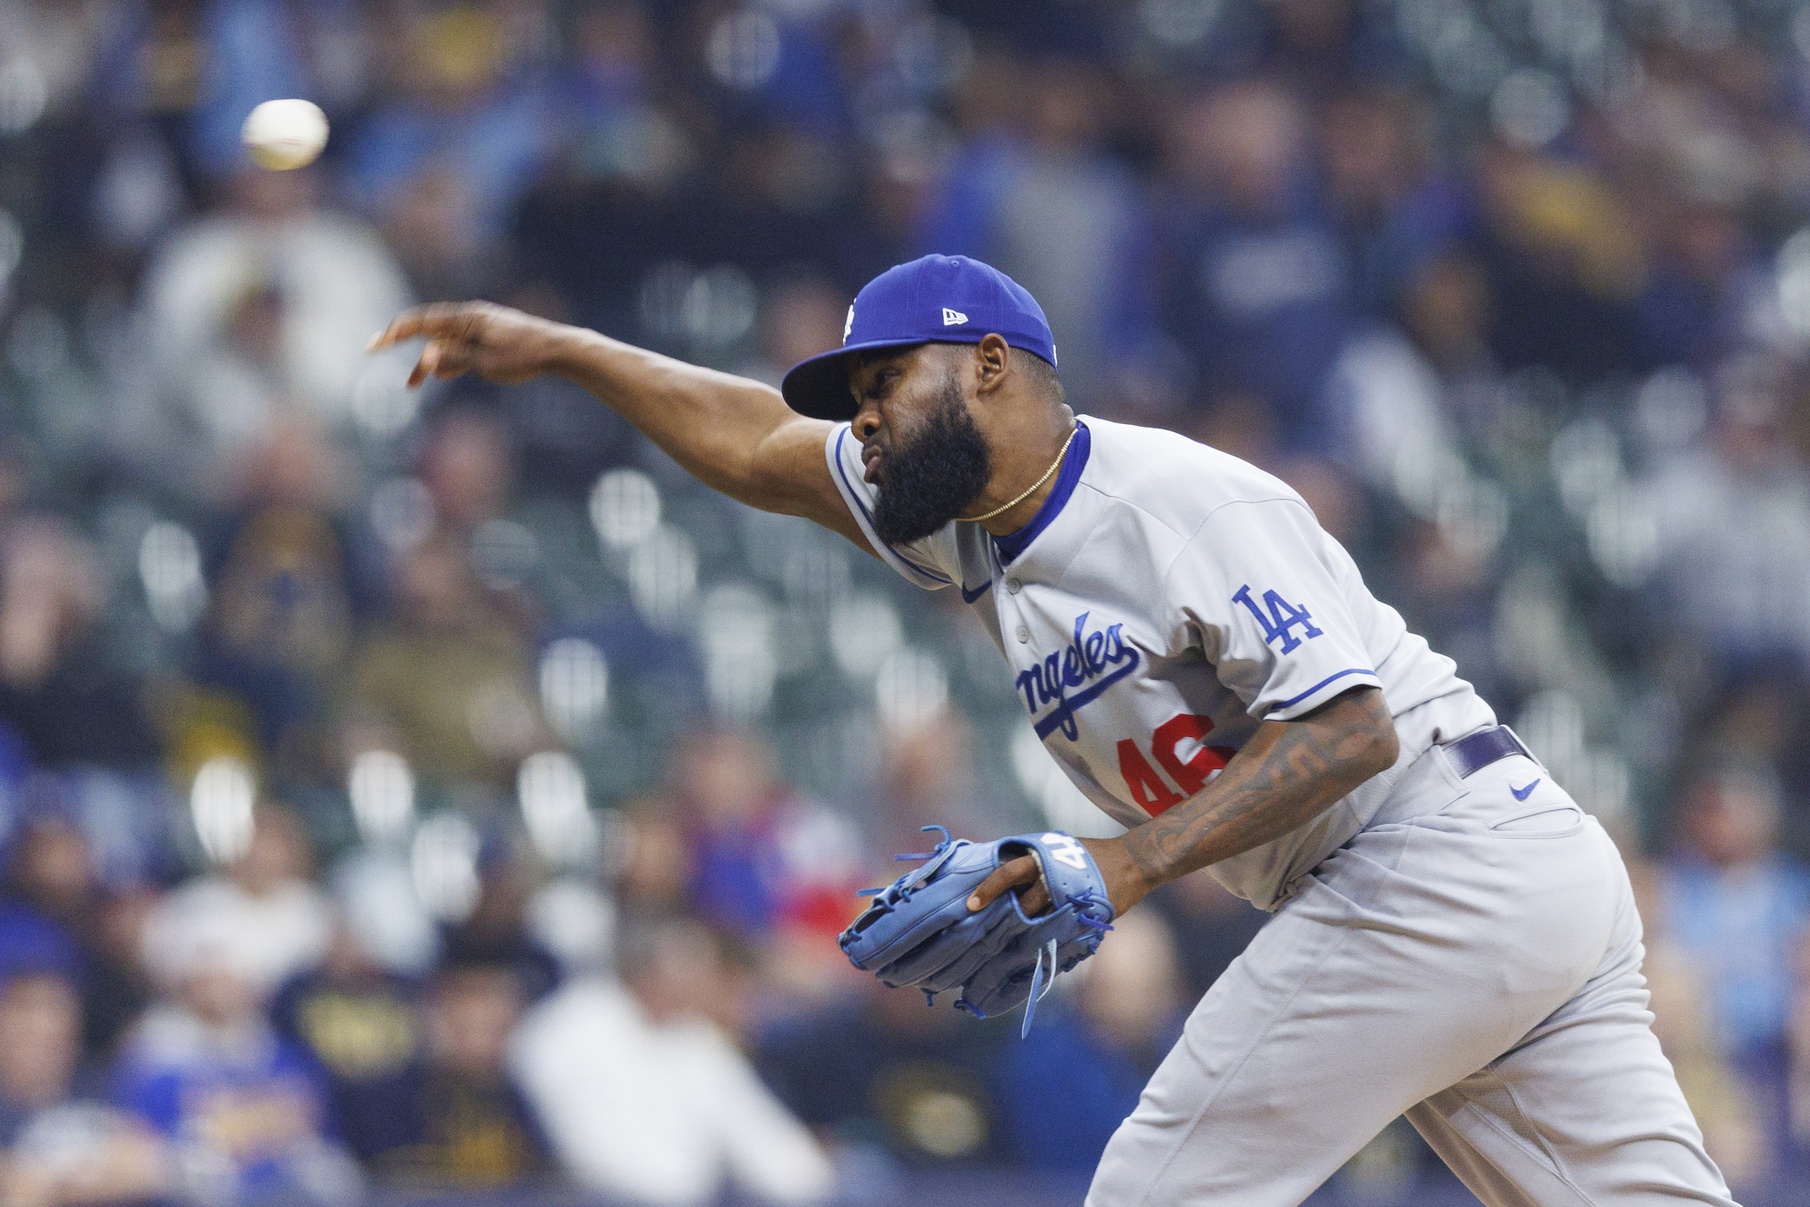 Dodgers Roster News: RHP Wander Suero Outrighted, Leaves Team via Free Agency